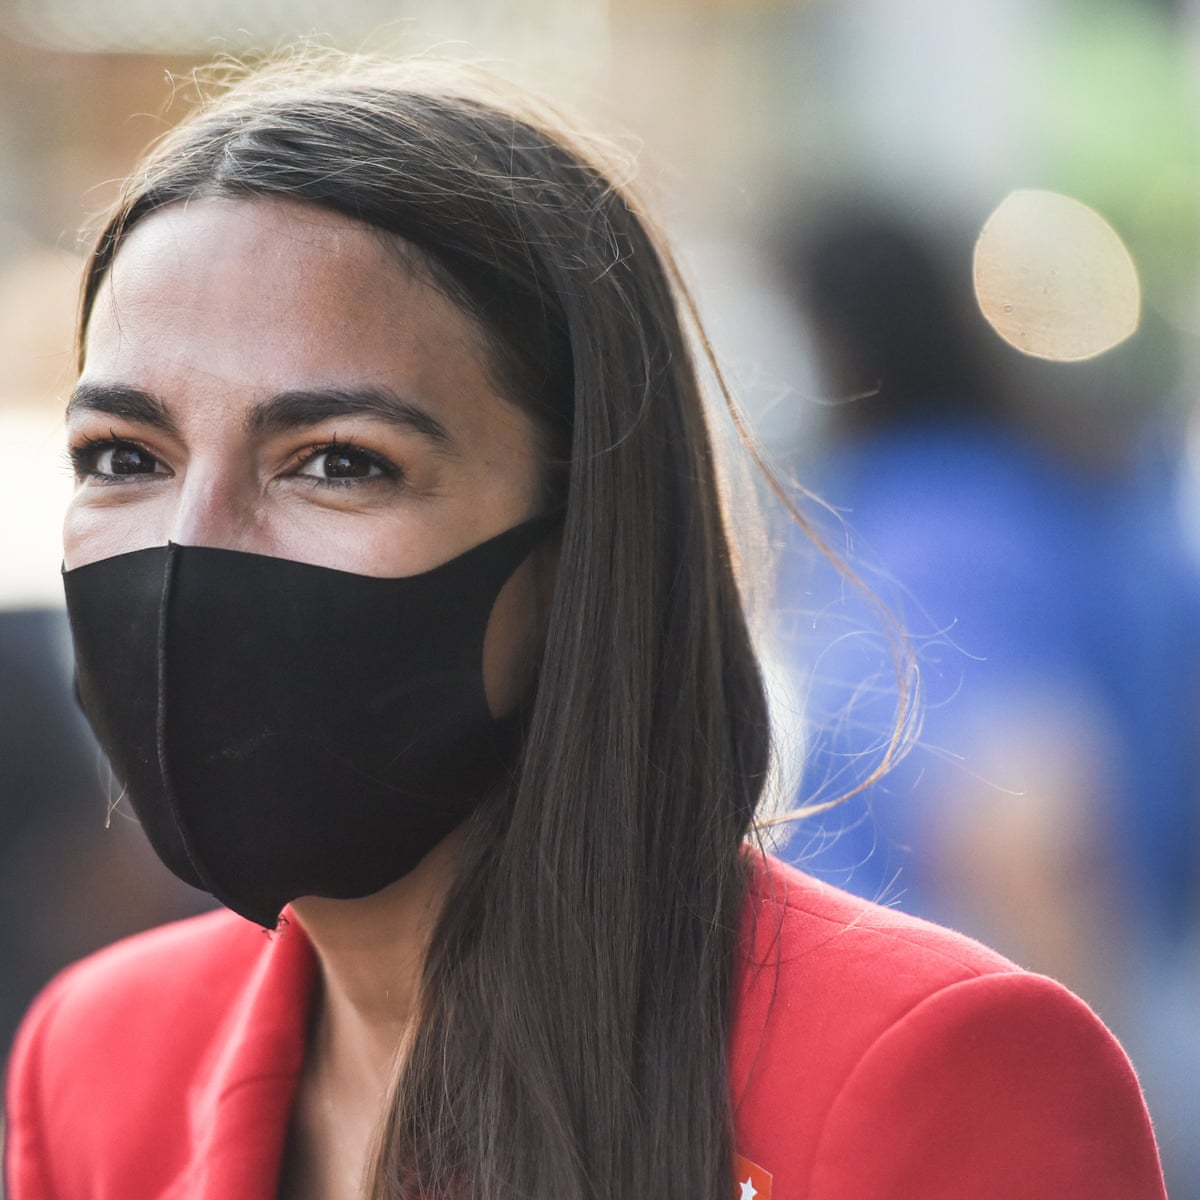 Black bitchs getting fucked out of there mind Bitches Get Stuff Done Alexandria Ocasio Cortez Hits Back After Republican S Tirade At Capitol Alexandria Ocasio Cortez The Guardian